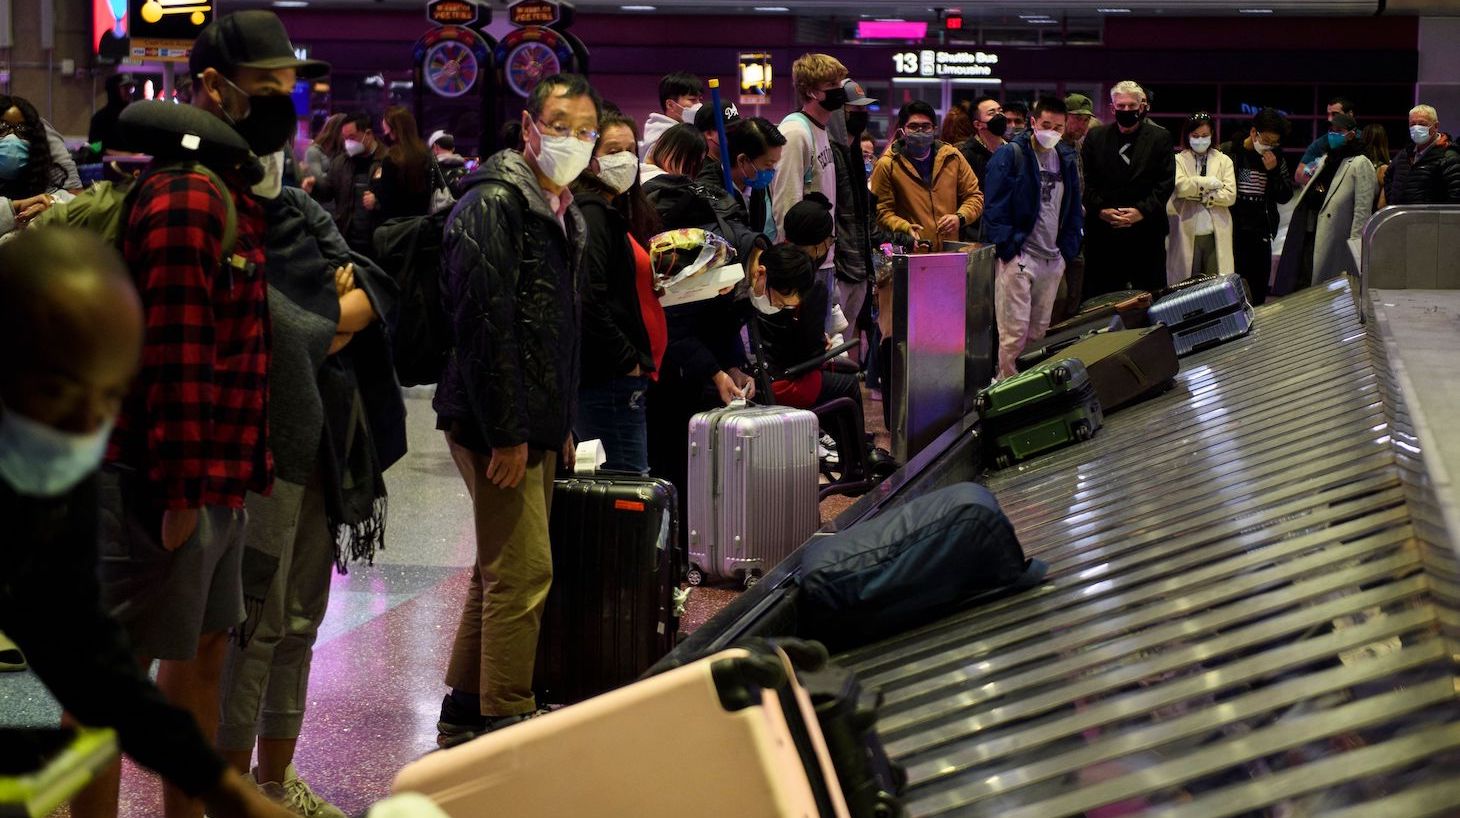 Airline passengers wearing face masks wait to collect bags from a baggage carousel at the Harry Reid International Airport (LAS) on January 2, 2022 in Las Vegas, California. - Americans returning home from holiday travel had to battle another day of airport chaos on January 2, with more than 2,000 flights cancelled due to bad weather or airline staffing woes sparked by a surge in Covid cases. (Photo by Patrick T. FALLON / AFP) (Photo by PATRICK T. FALLON/AFP via Getty Images)